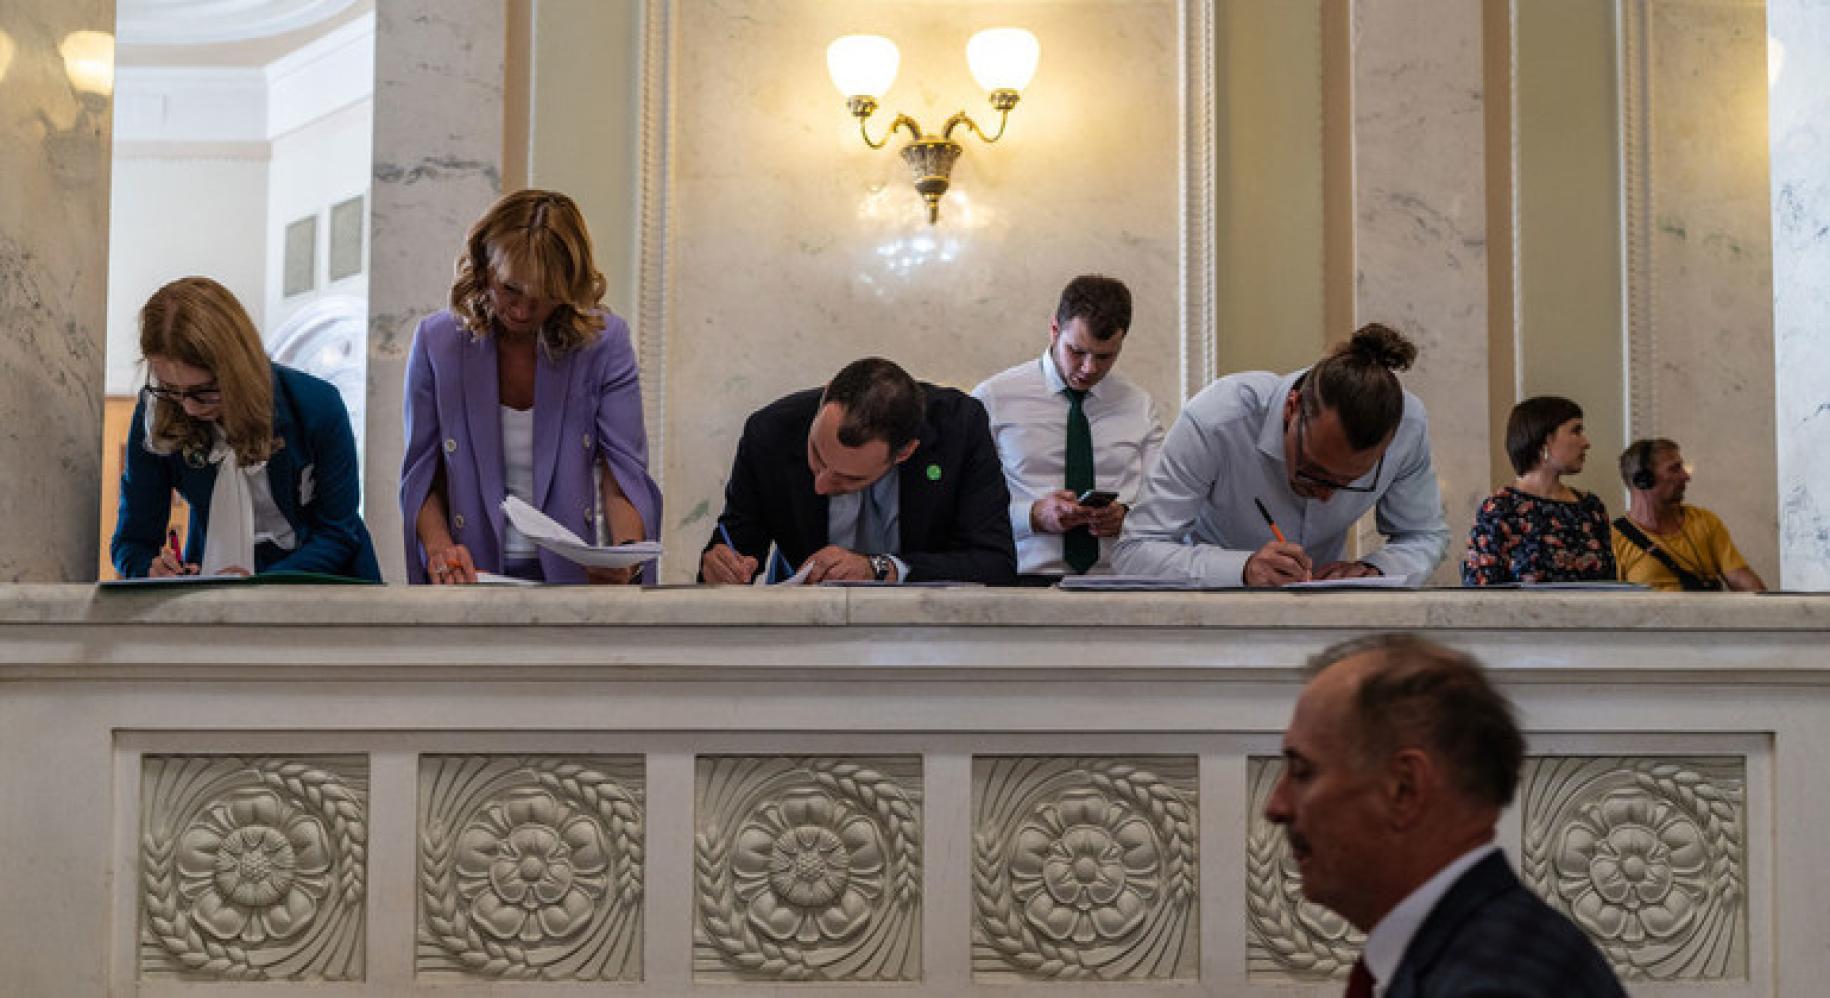 People signing documents in a formal setting